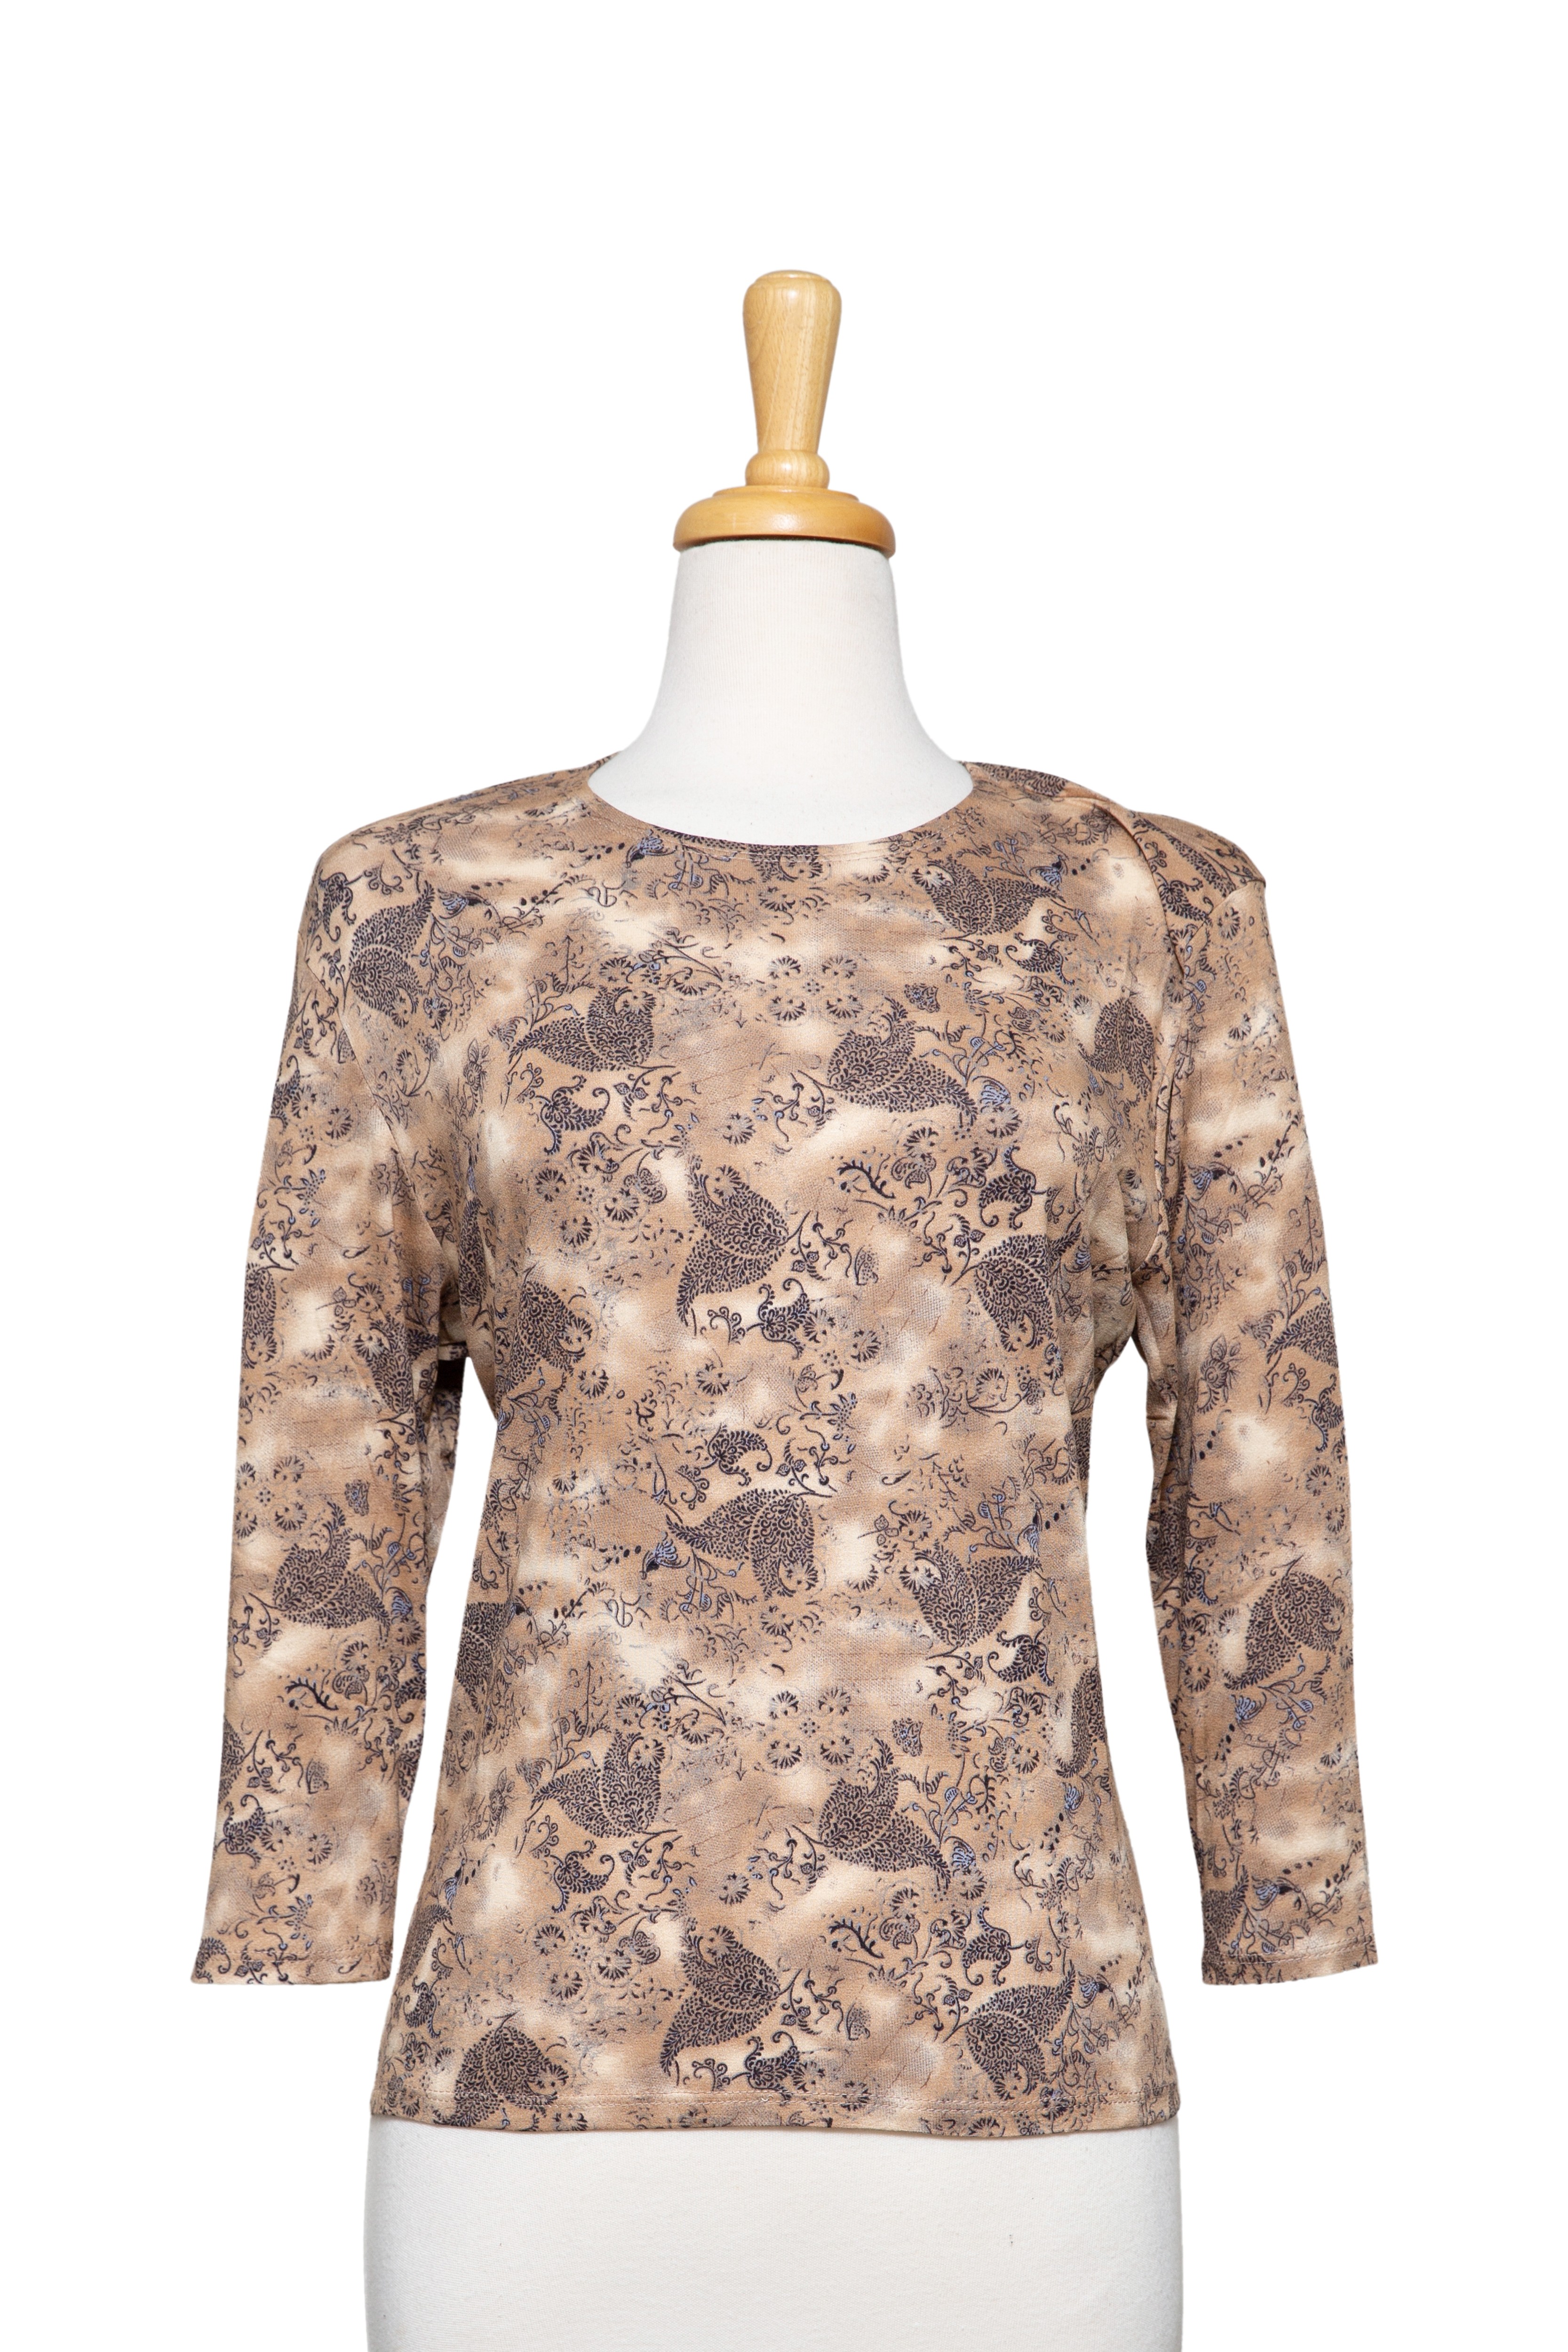 Tan and Ivory Paisley Cotton 3/4 Sleeve Top 